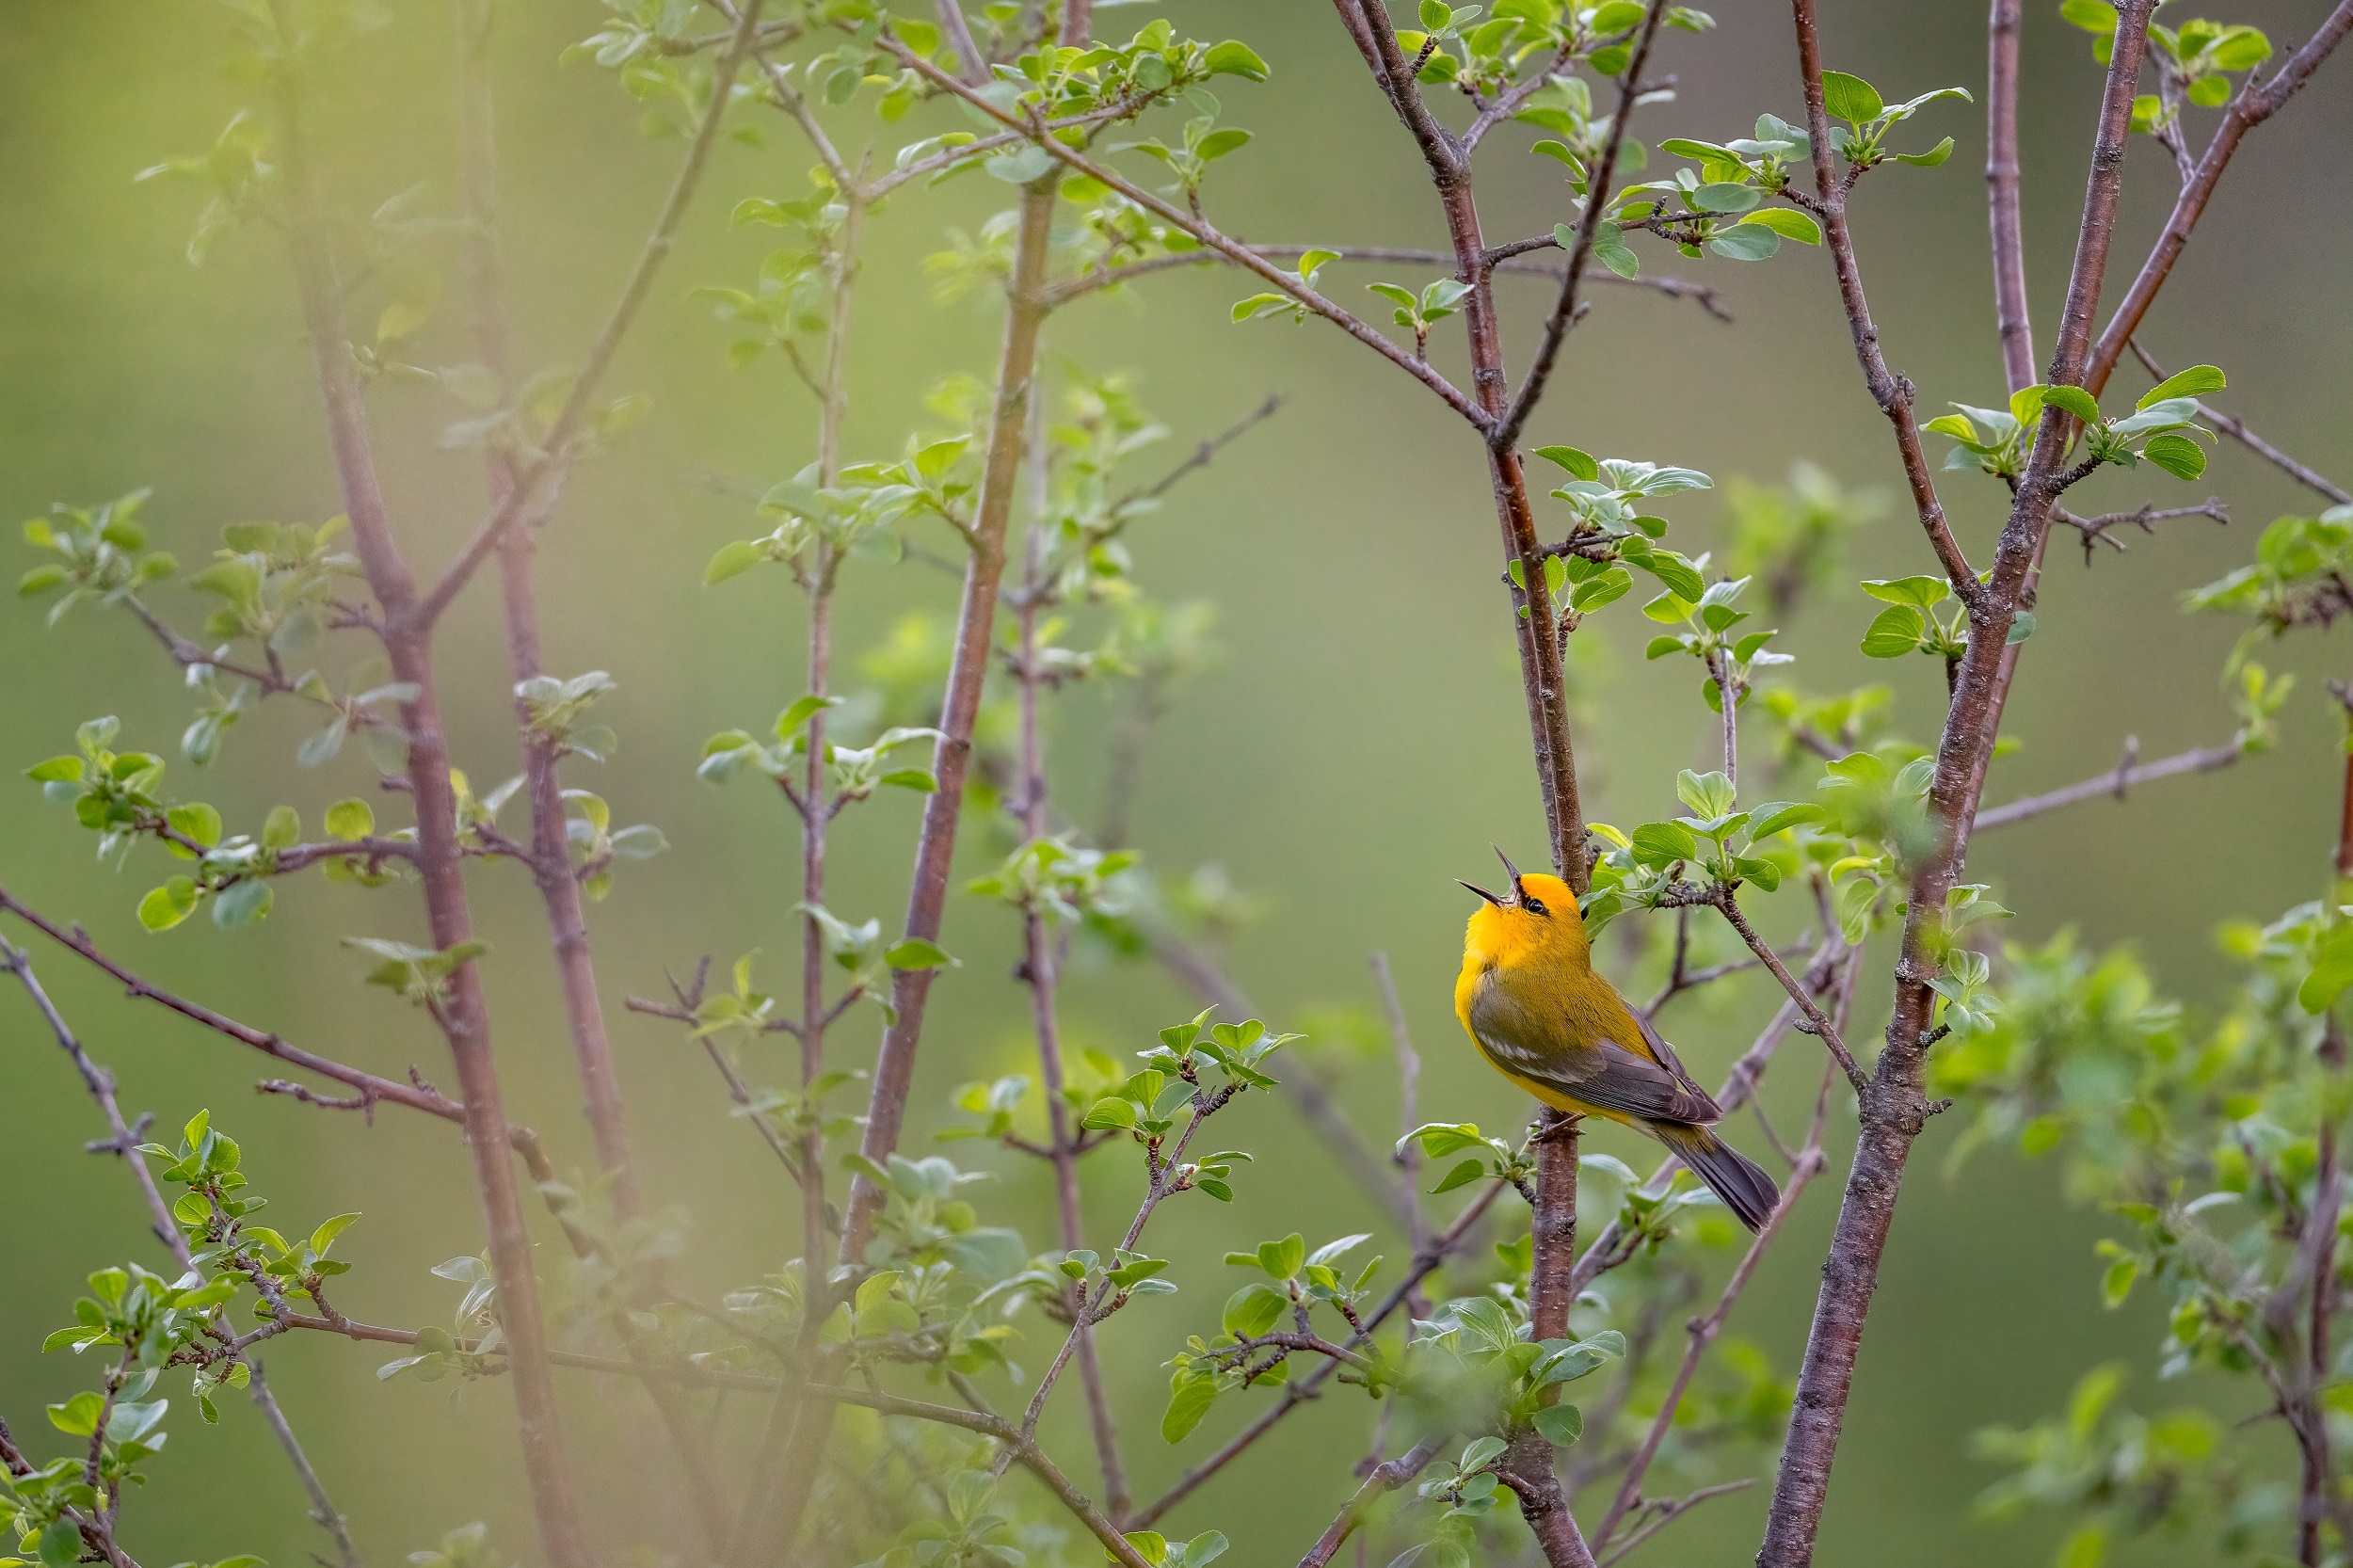 slightly wide photo of an adult male Blue-winged Warbler - a bright yellow bird with a black eye mask, silvery-blue wings, and two white wingbars. the bird is perched lower down on a branch and singing up into